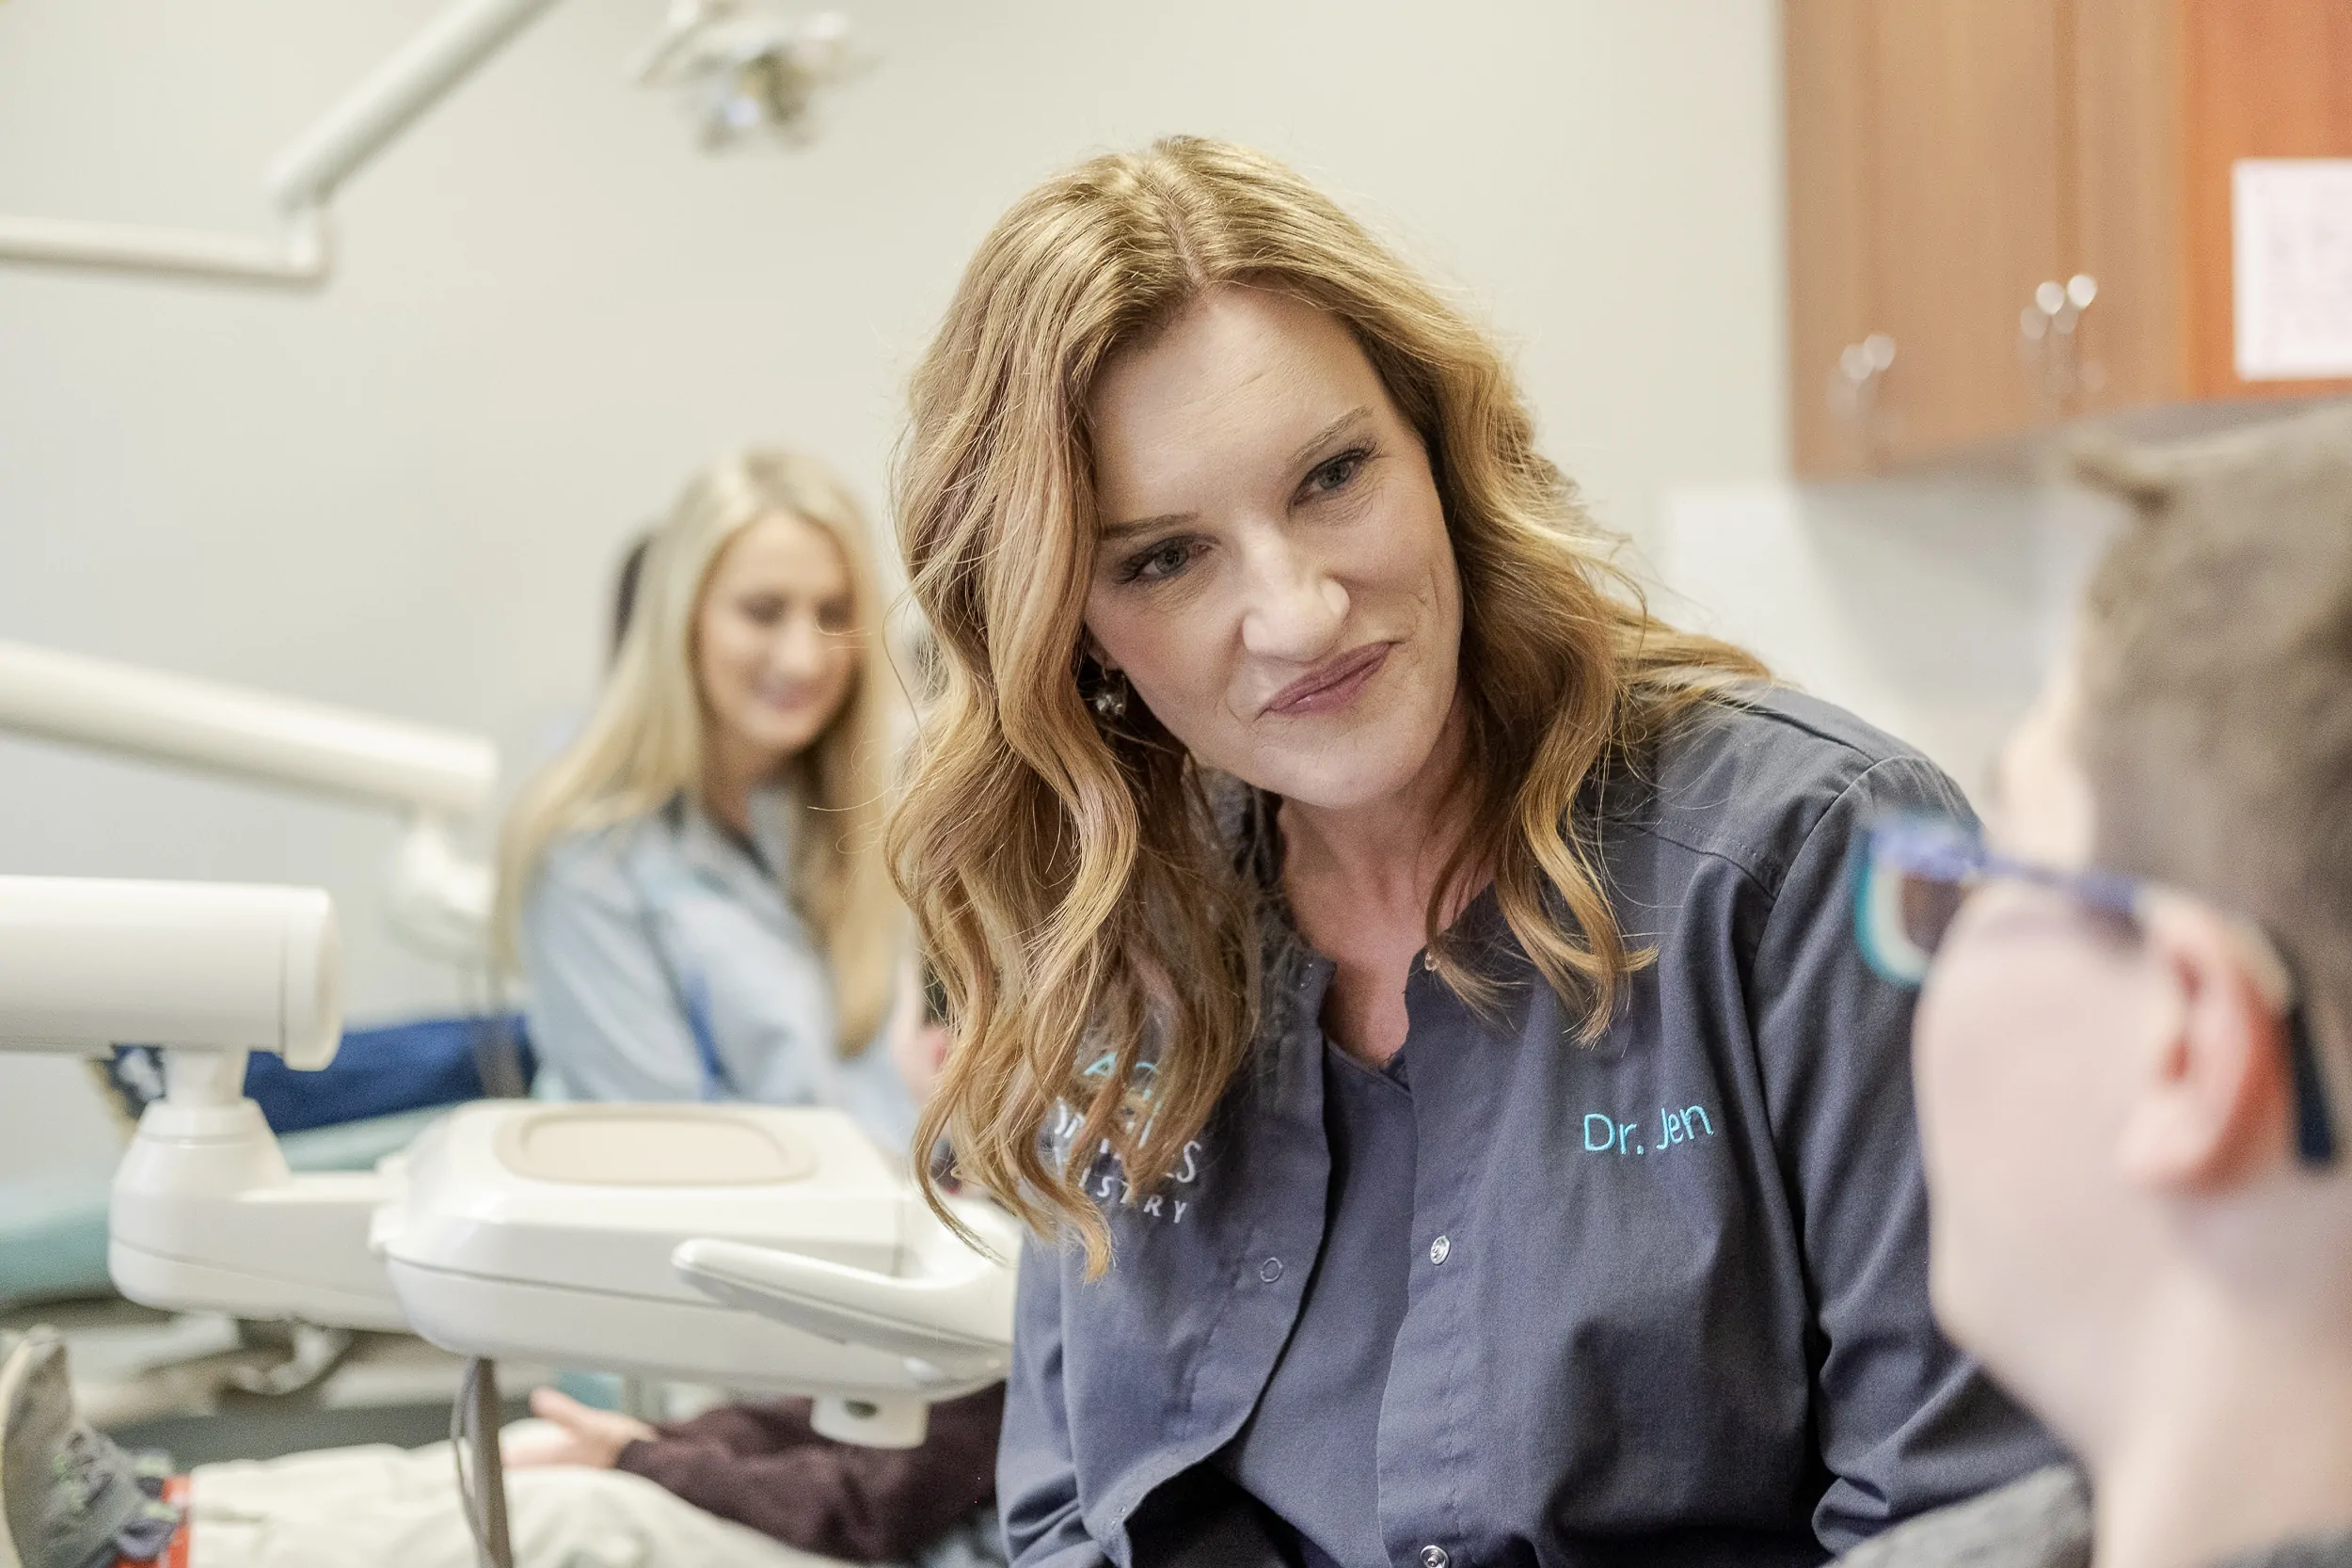 Doctors Magic Smiles Dentistry 2019 El Dorado Hills California Dentist 25 - Frequently Asked Questions About COVID-19